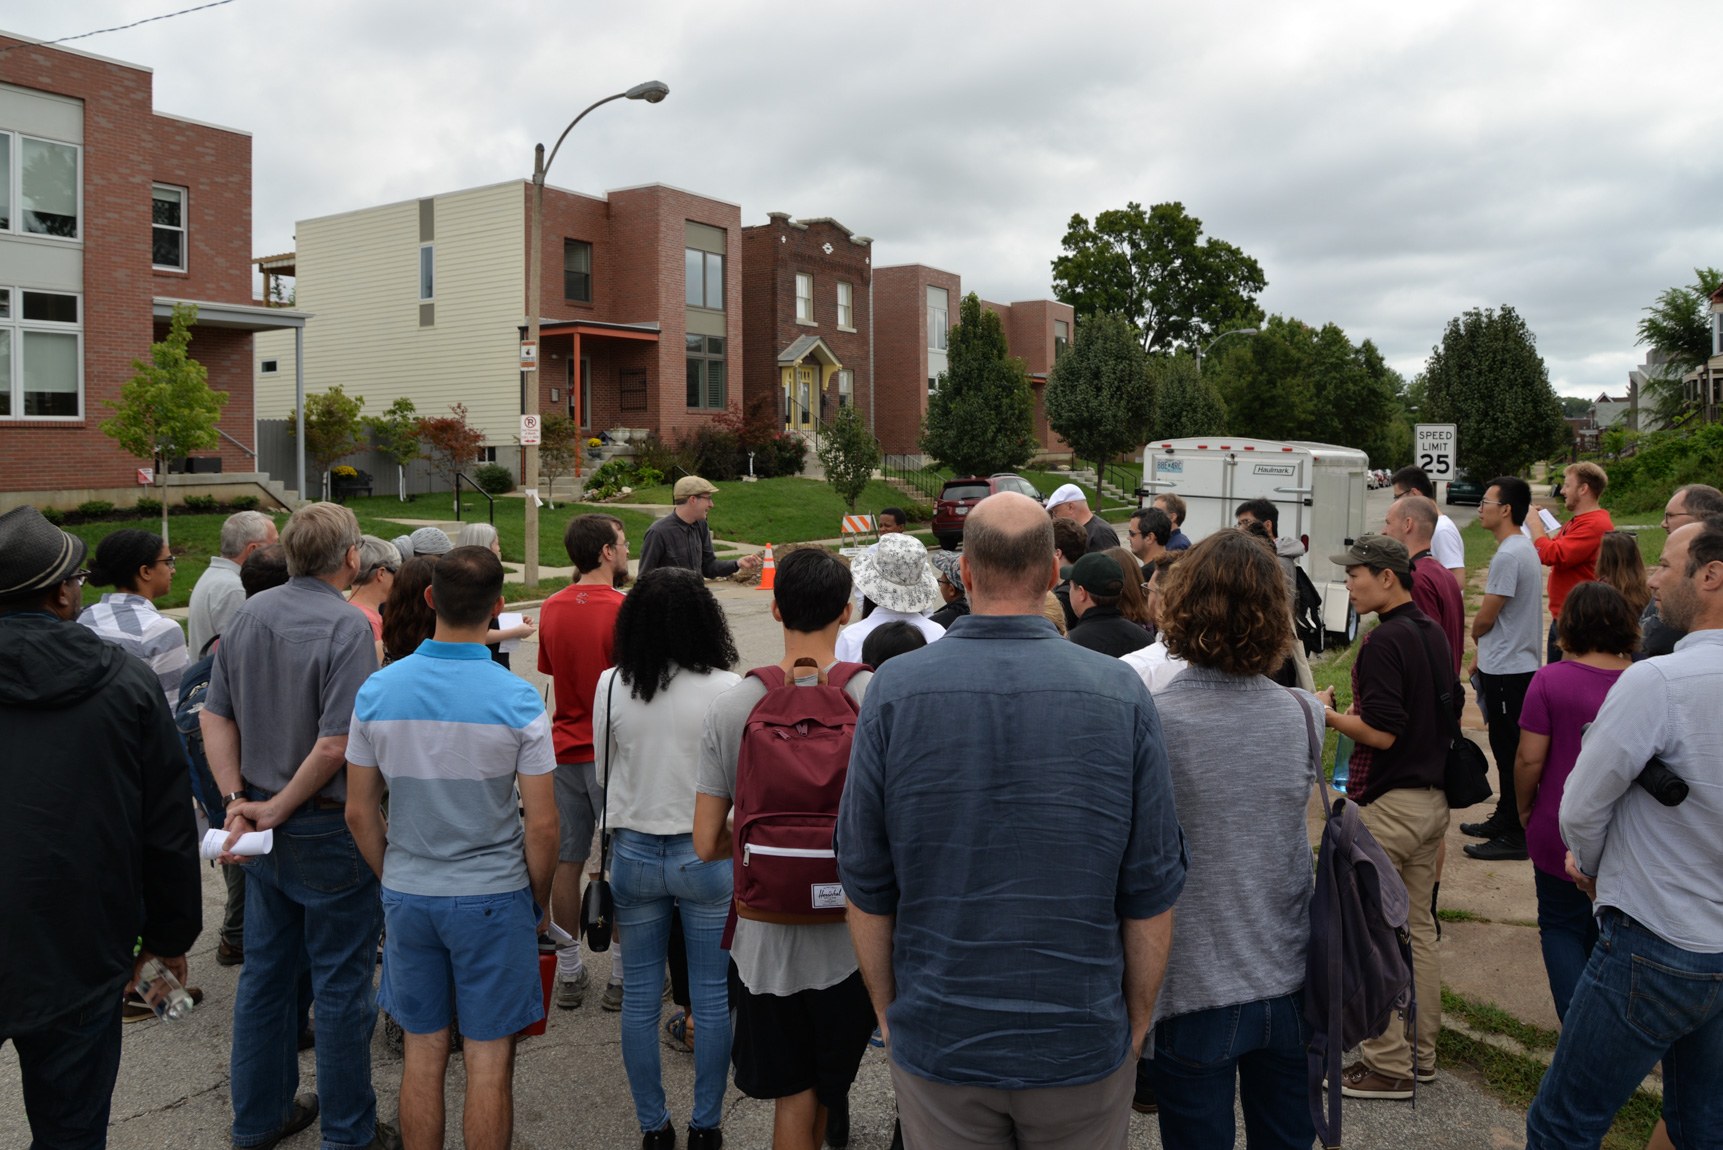 A large group gathers in a residential intersection listen to the tour leader.